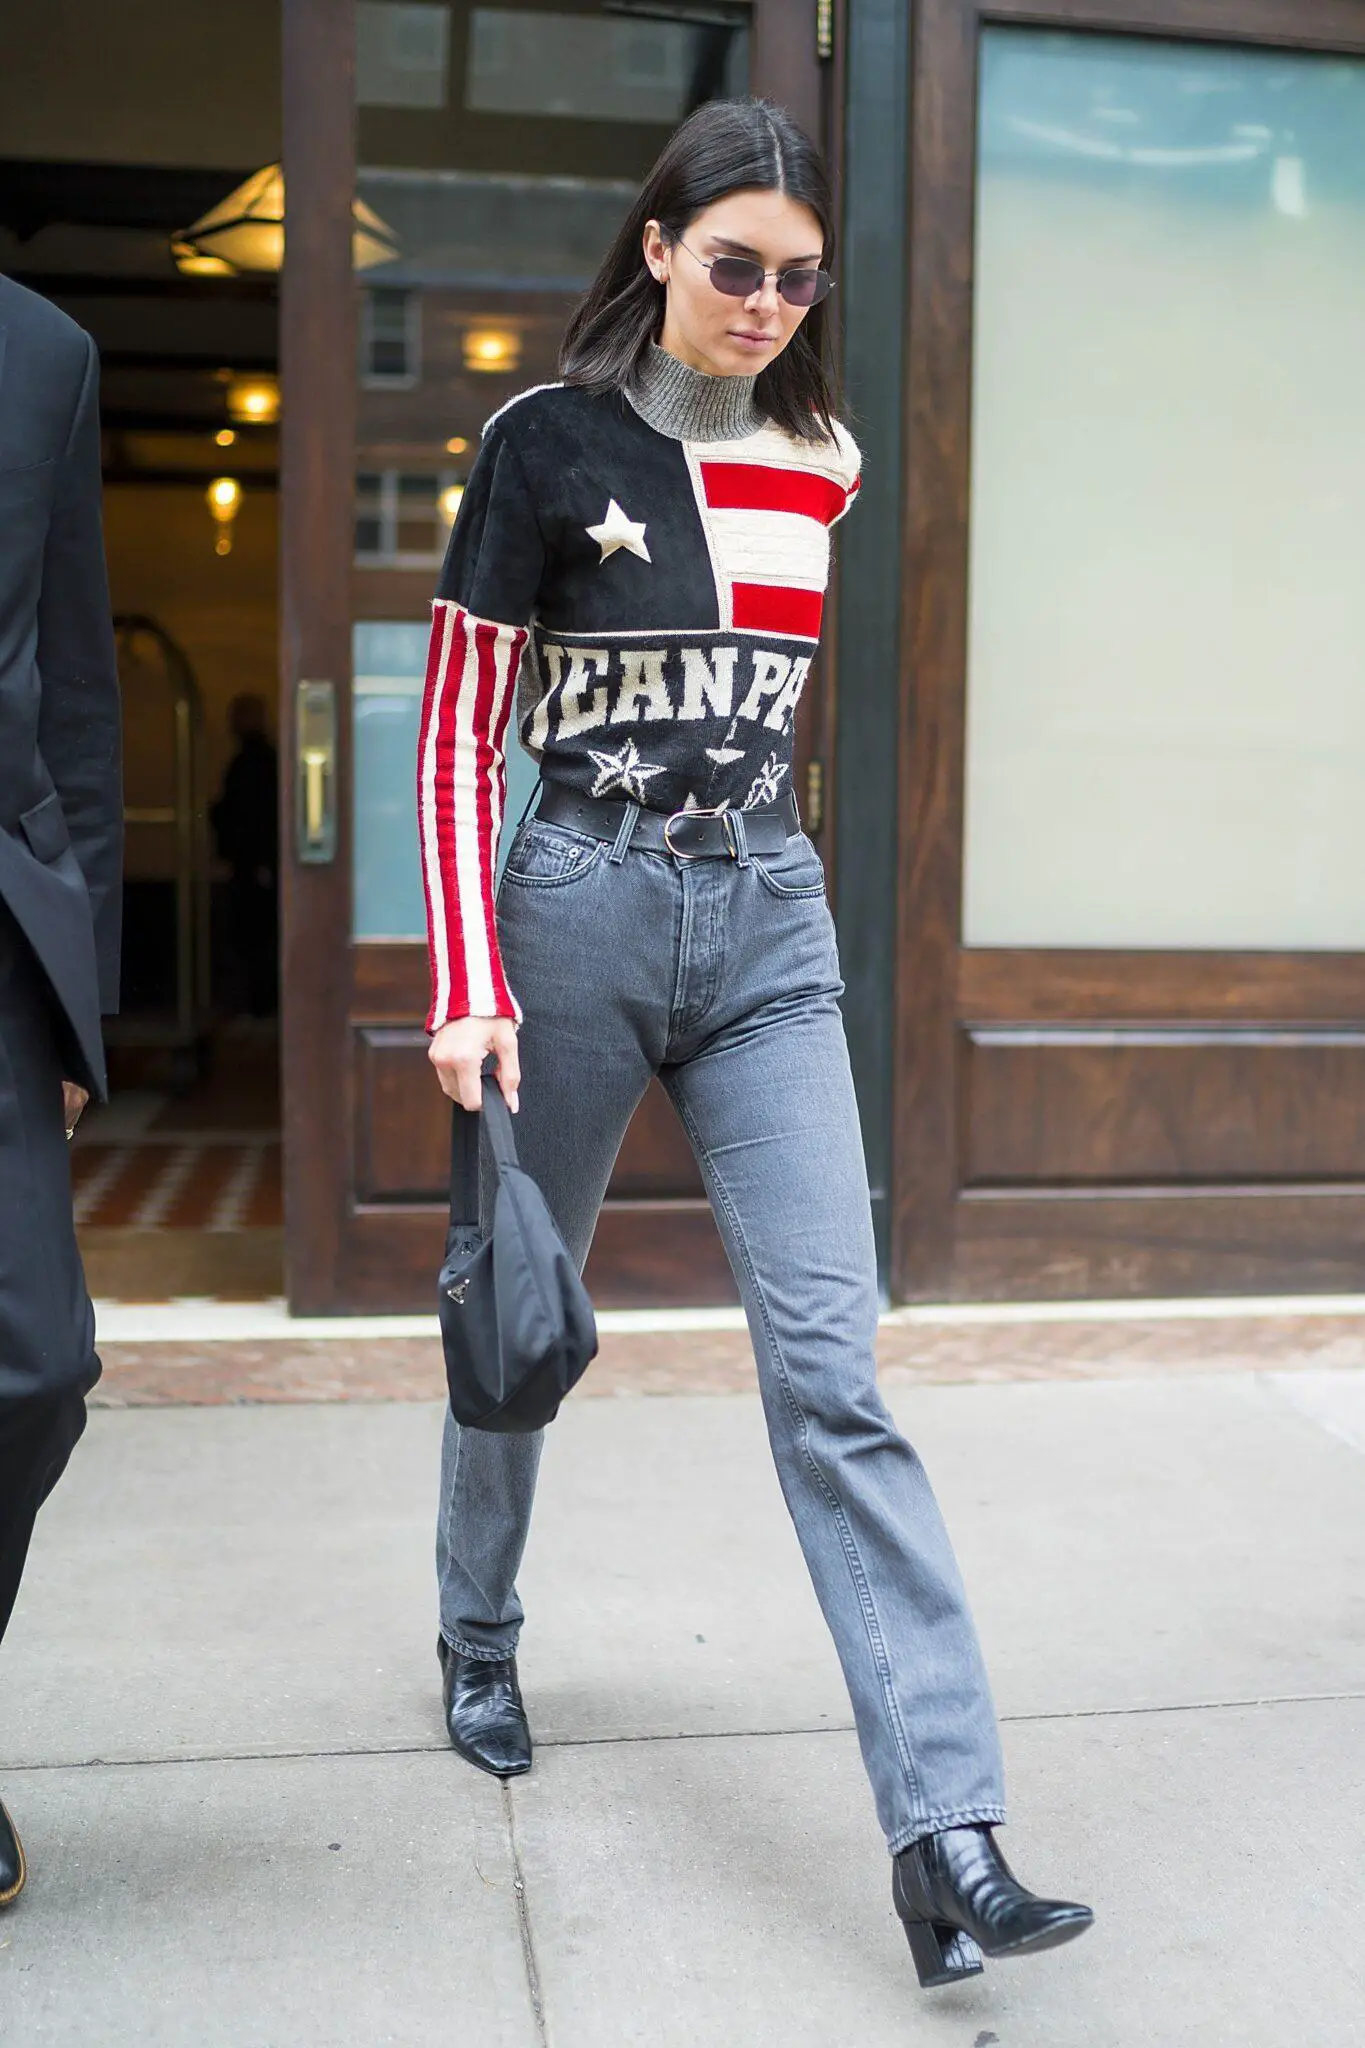 kendall-jenner-gettyimages-961462056-1527080544-8559679